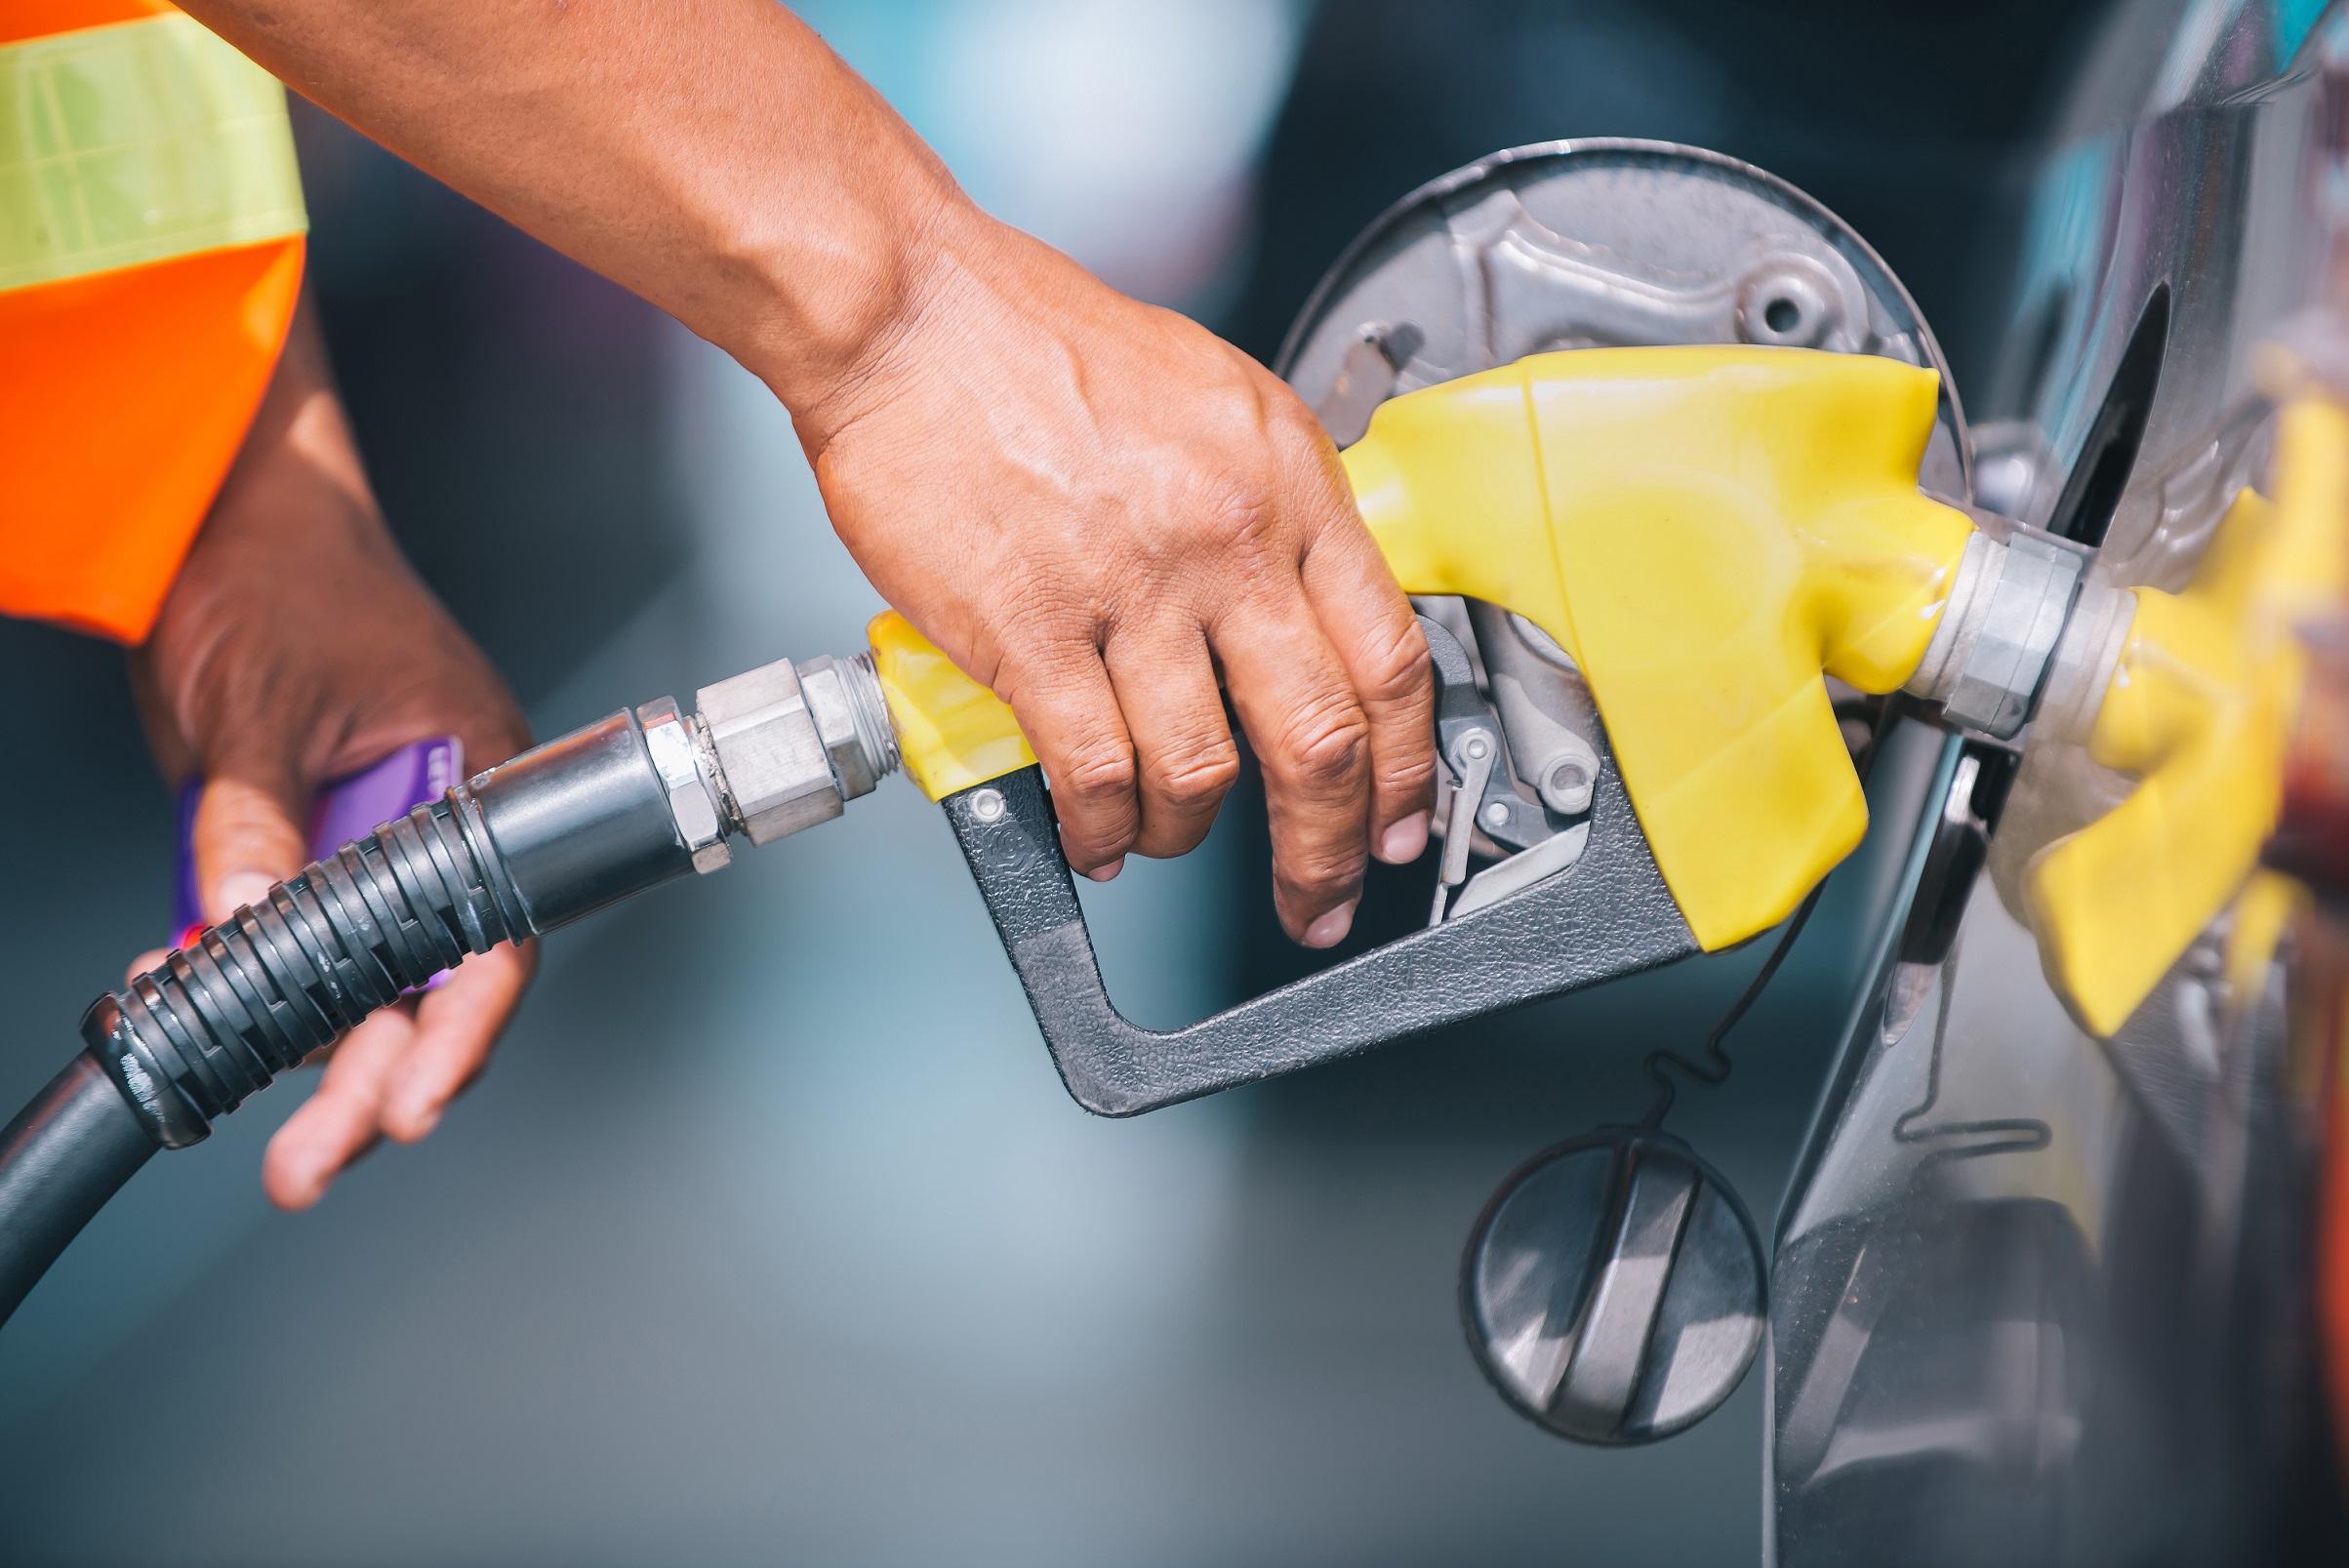 fuel-tax-credit-rates-changes-for-australian-businesses-afs